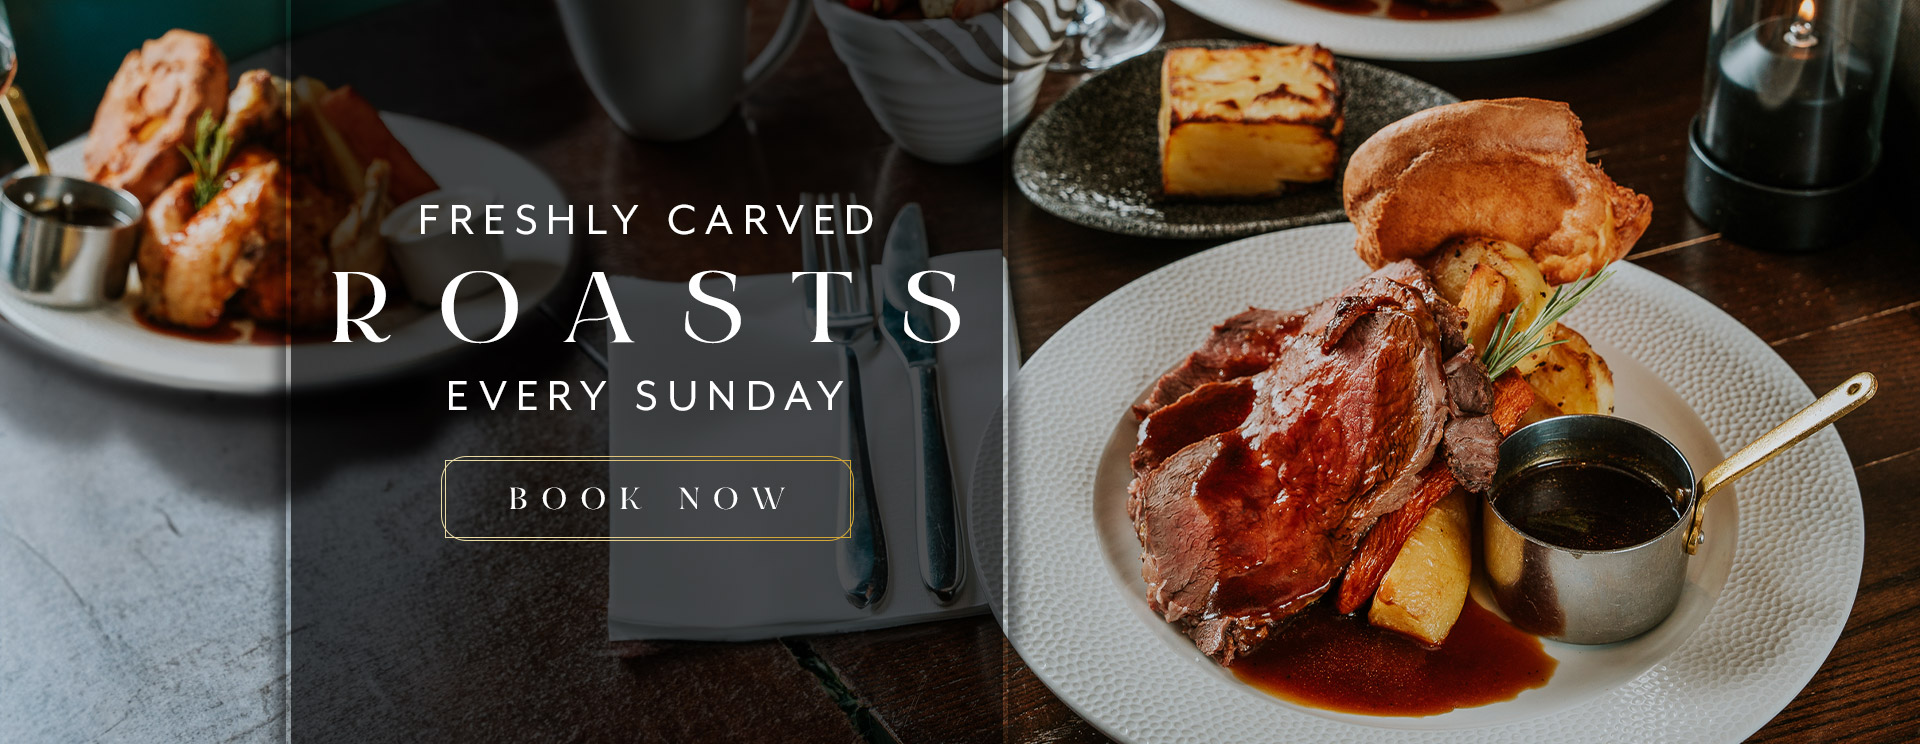 Sunday Lunch at The Hand & Sceptre